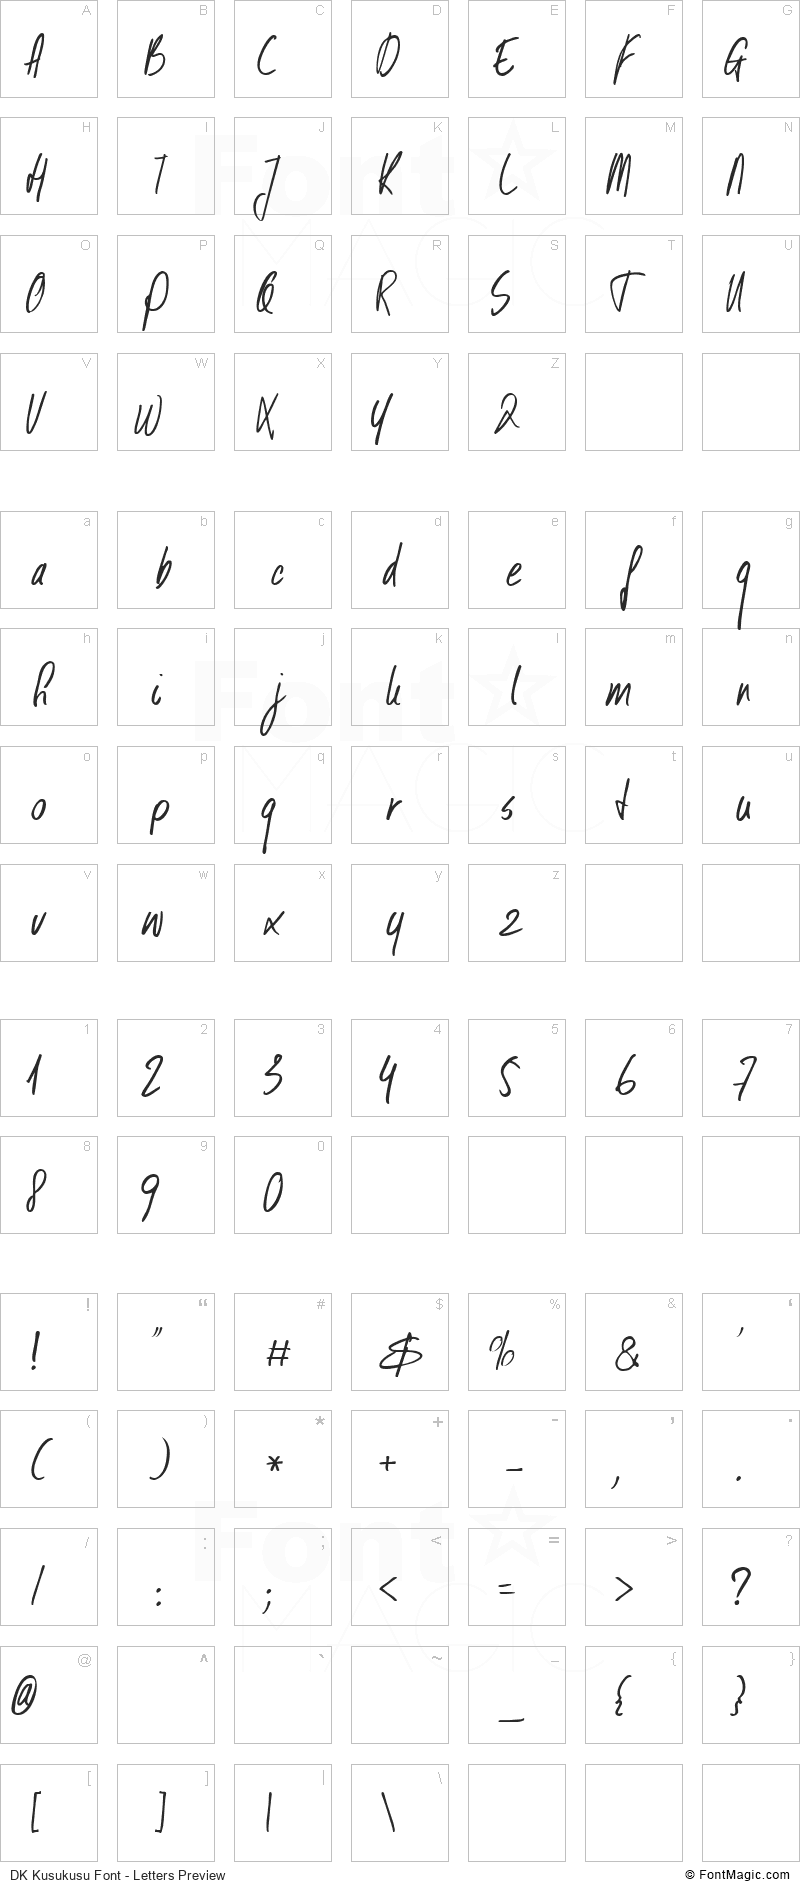 DK Kusukusu Font - All Latters Preview Chart